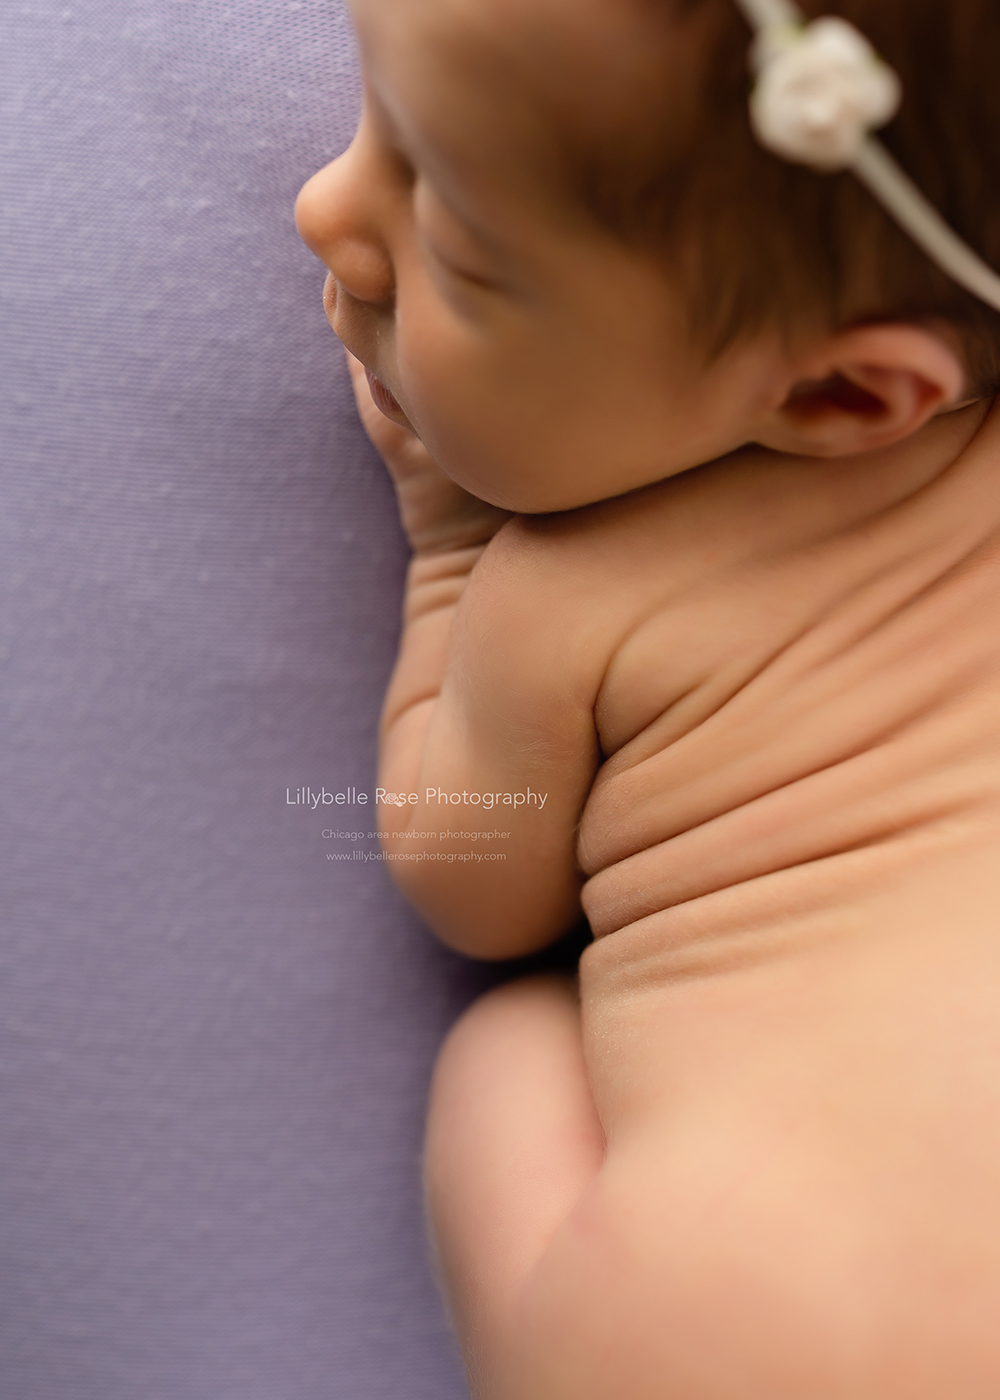 teething tips and tricks, baby photo shoot, infant pictures, baby pictures, newborn photographer